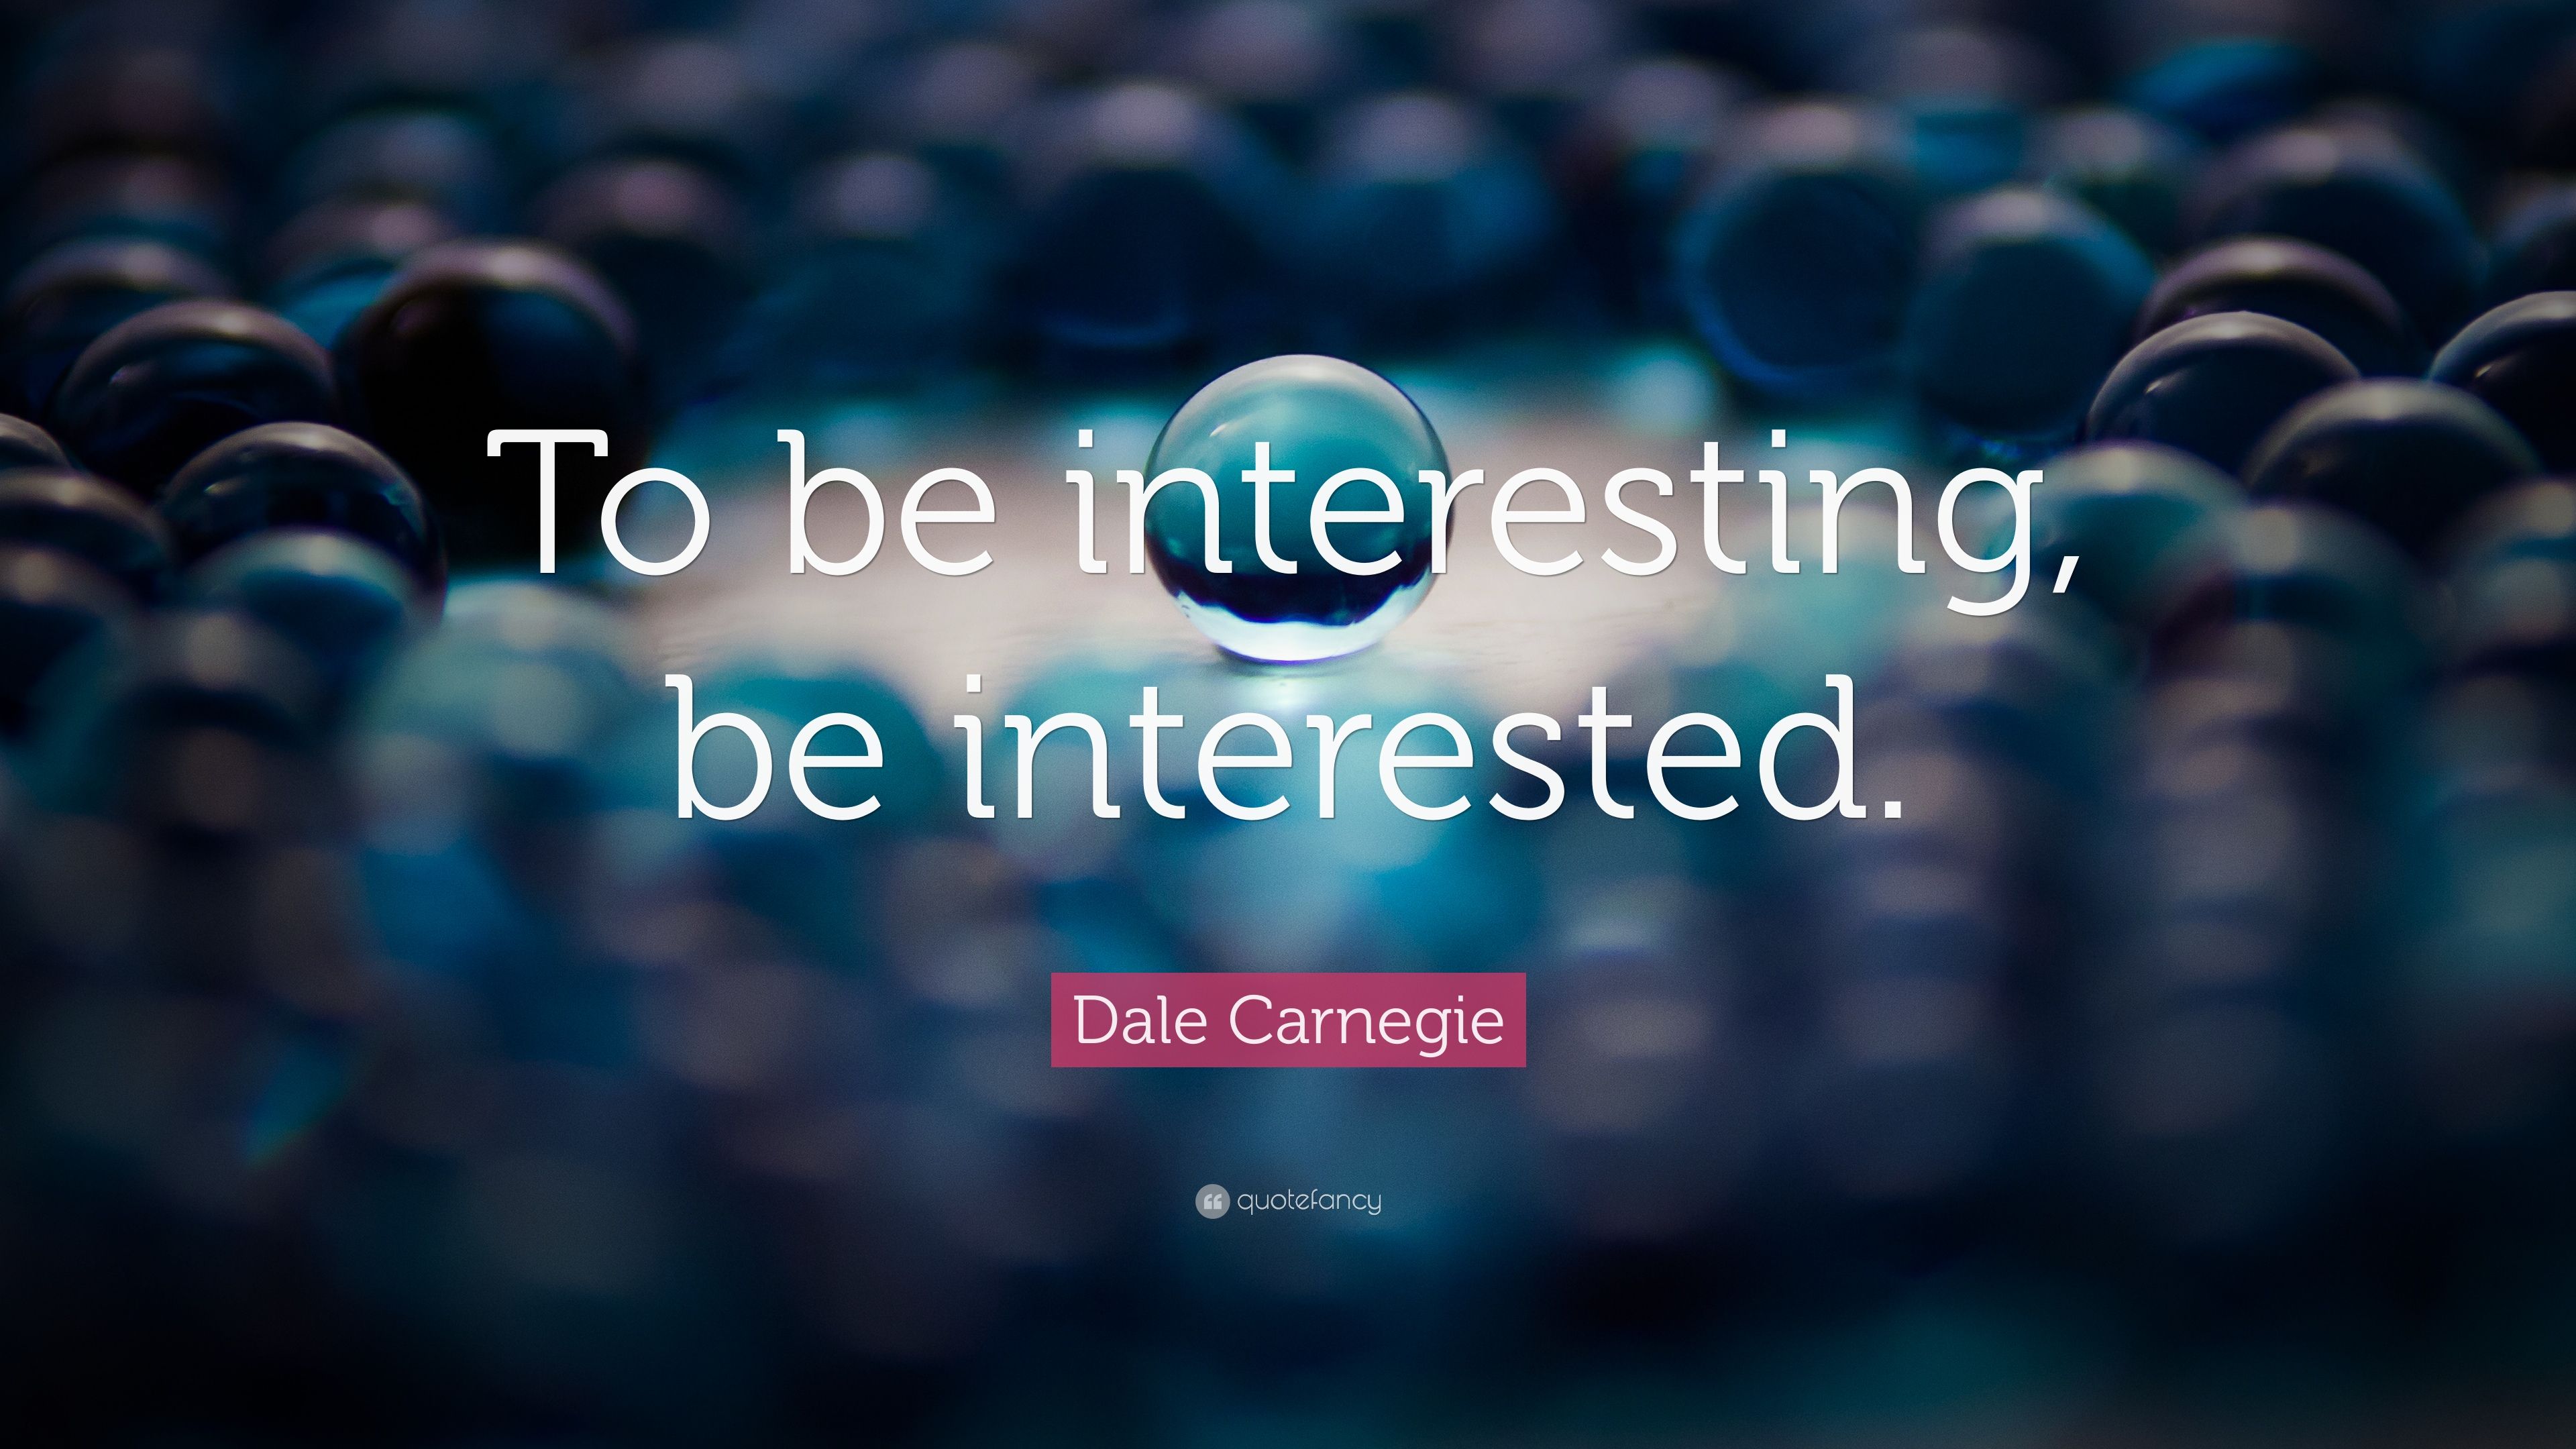 Dale Carnegie Quote: “To be interesting, be interested.” 20